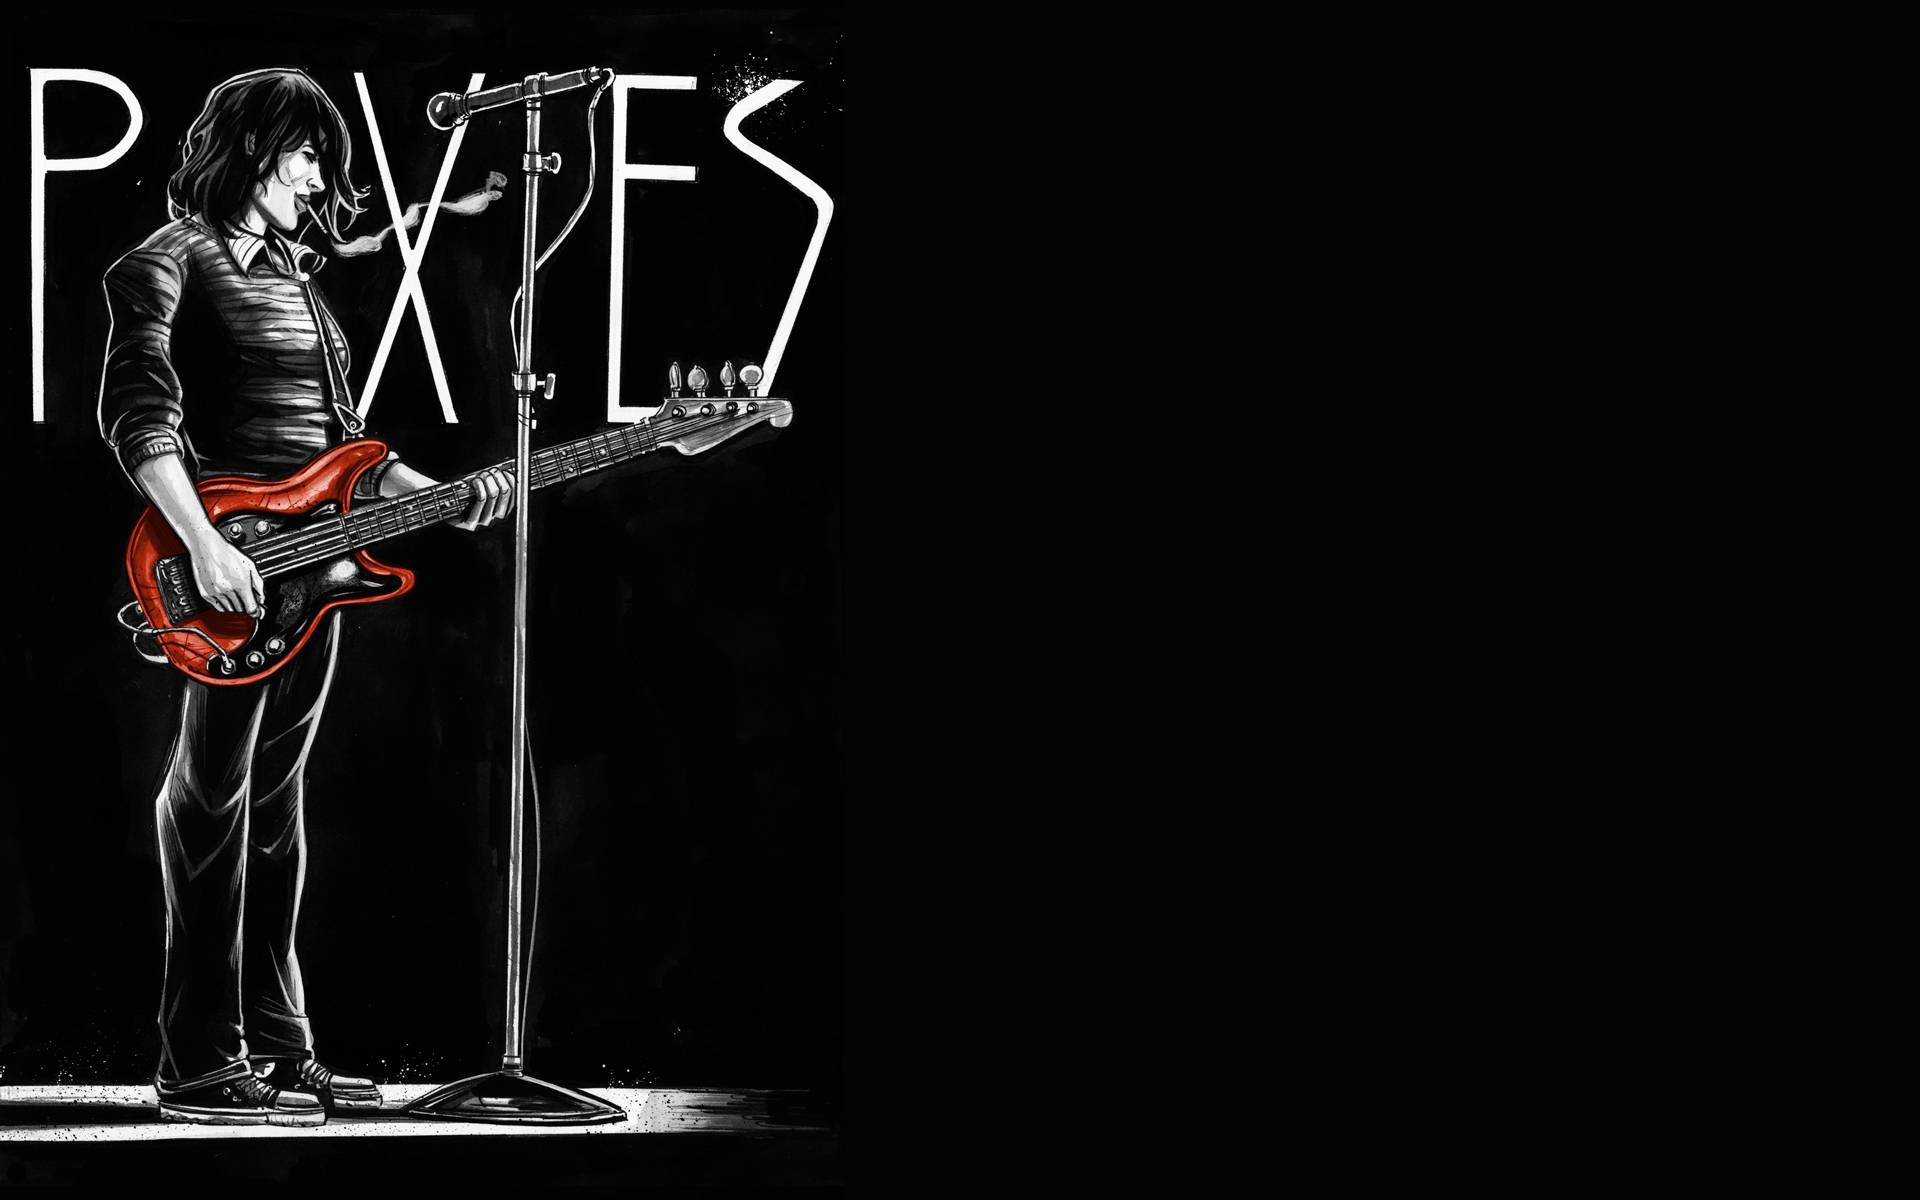 Pixies wallpapers, Pixies fanart, Band's subjects, Band's names, 1920x1200 HD Desktop